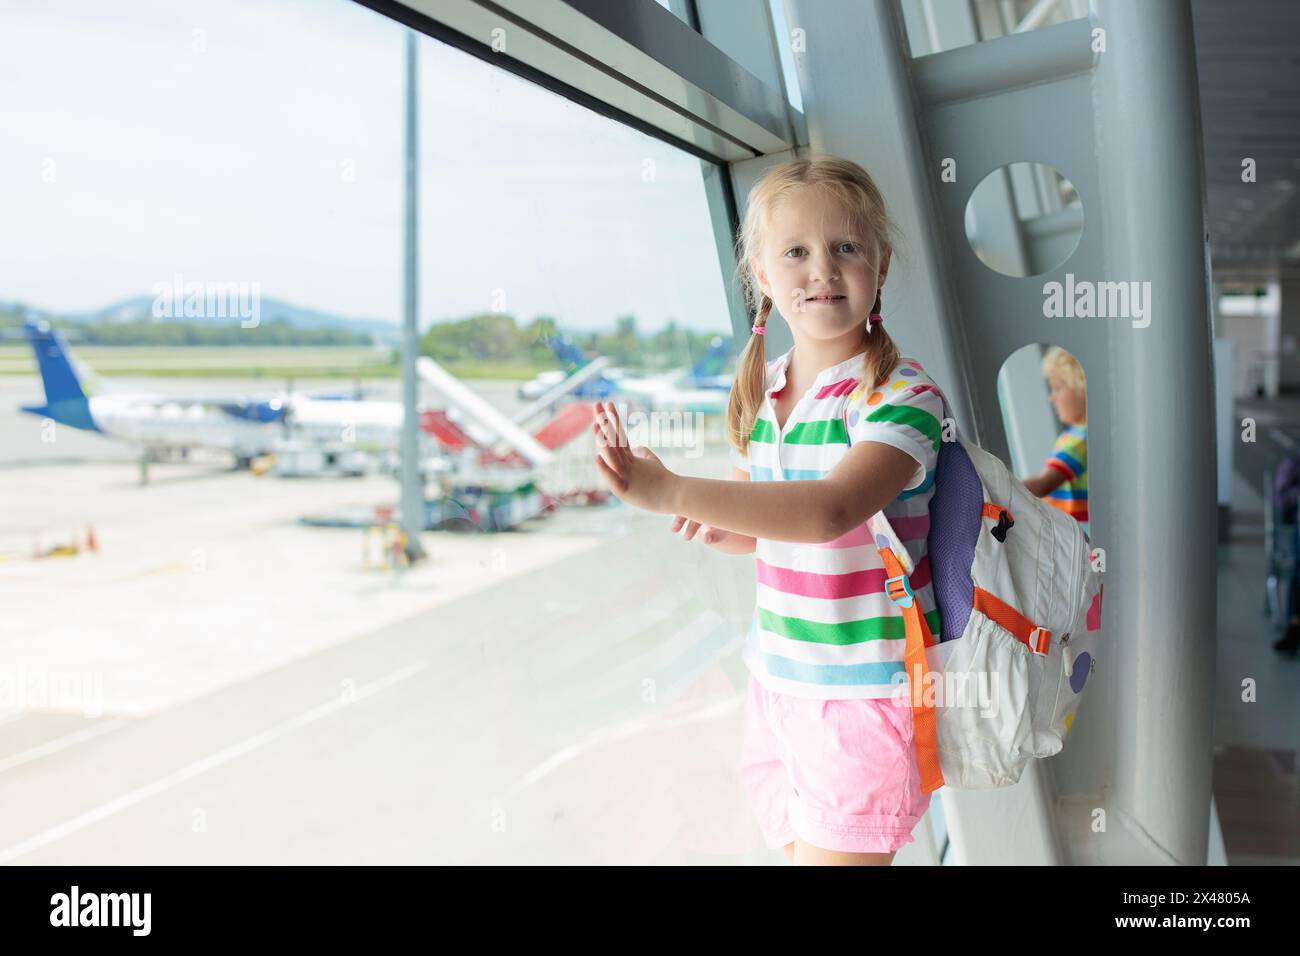 Kids at airport. Children look at airplane. Traveling and flying with child. Family at departure gate. Vacation and travel with young kid. Stock Photo